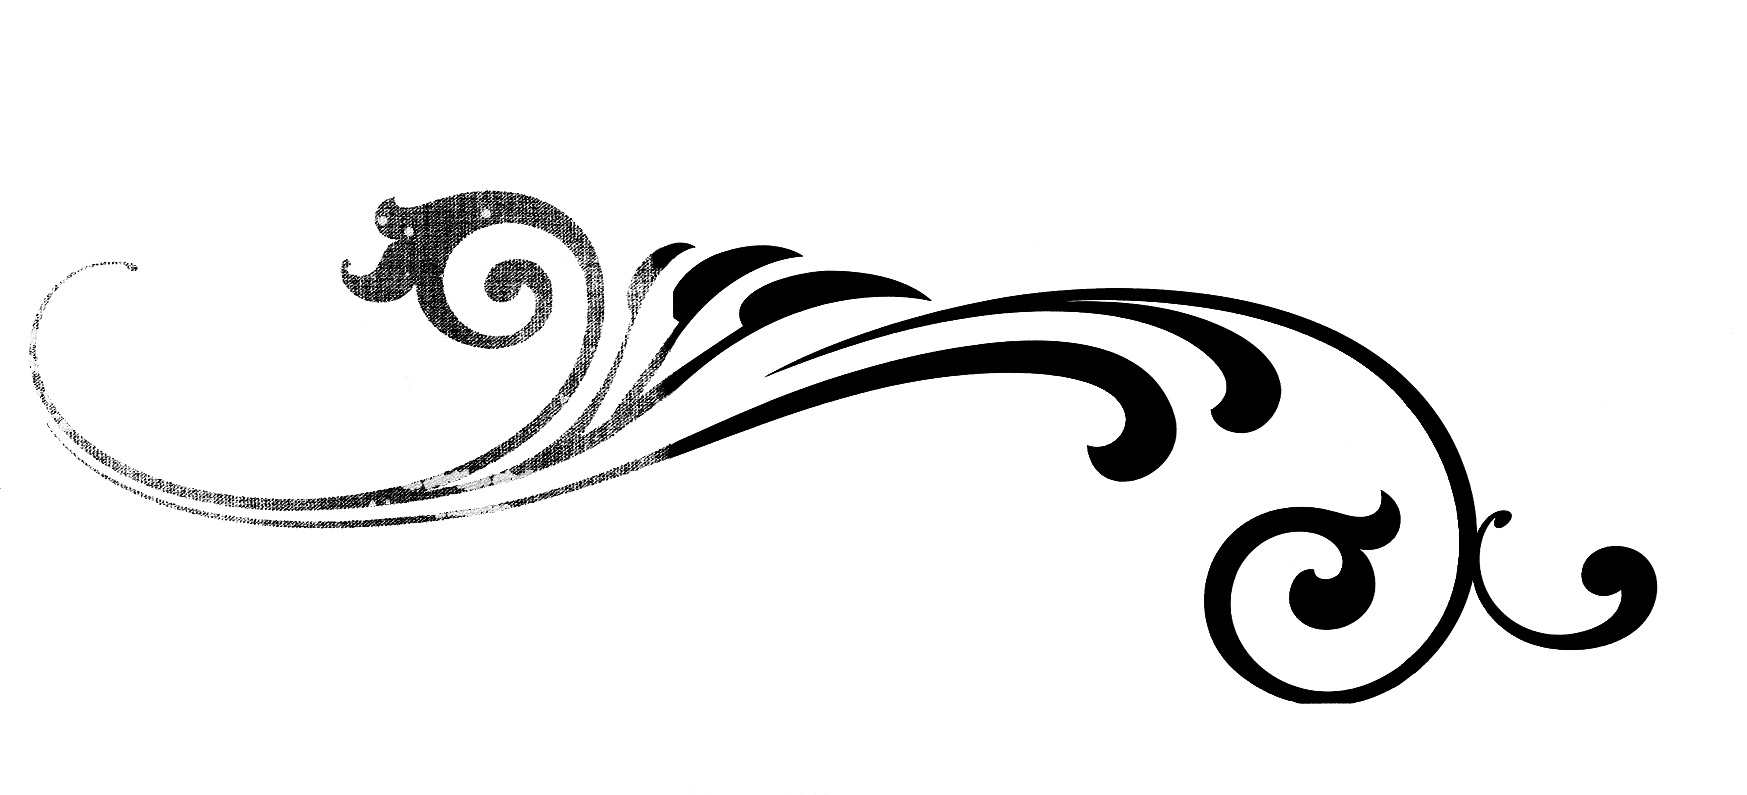 Free Calligraphy Cliparts, Download Free Clip Art, Free Clip.